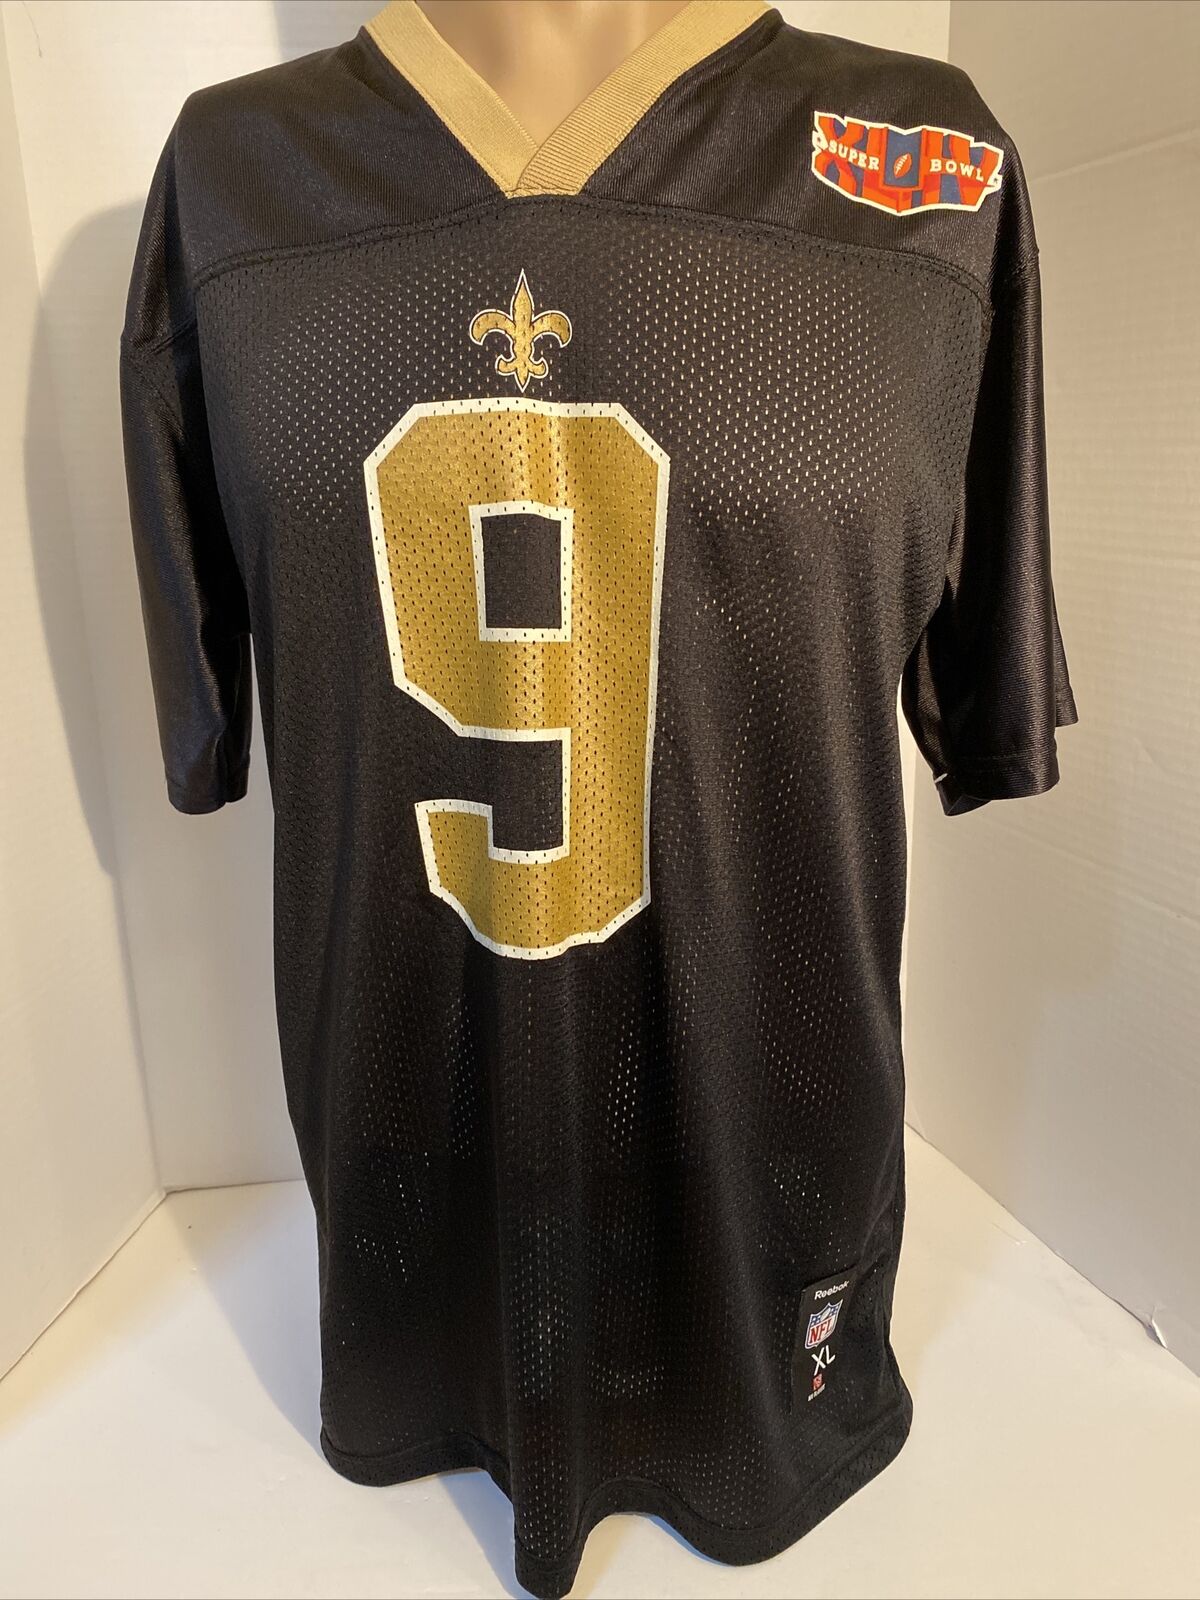 drew brees youth jersey